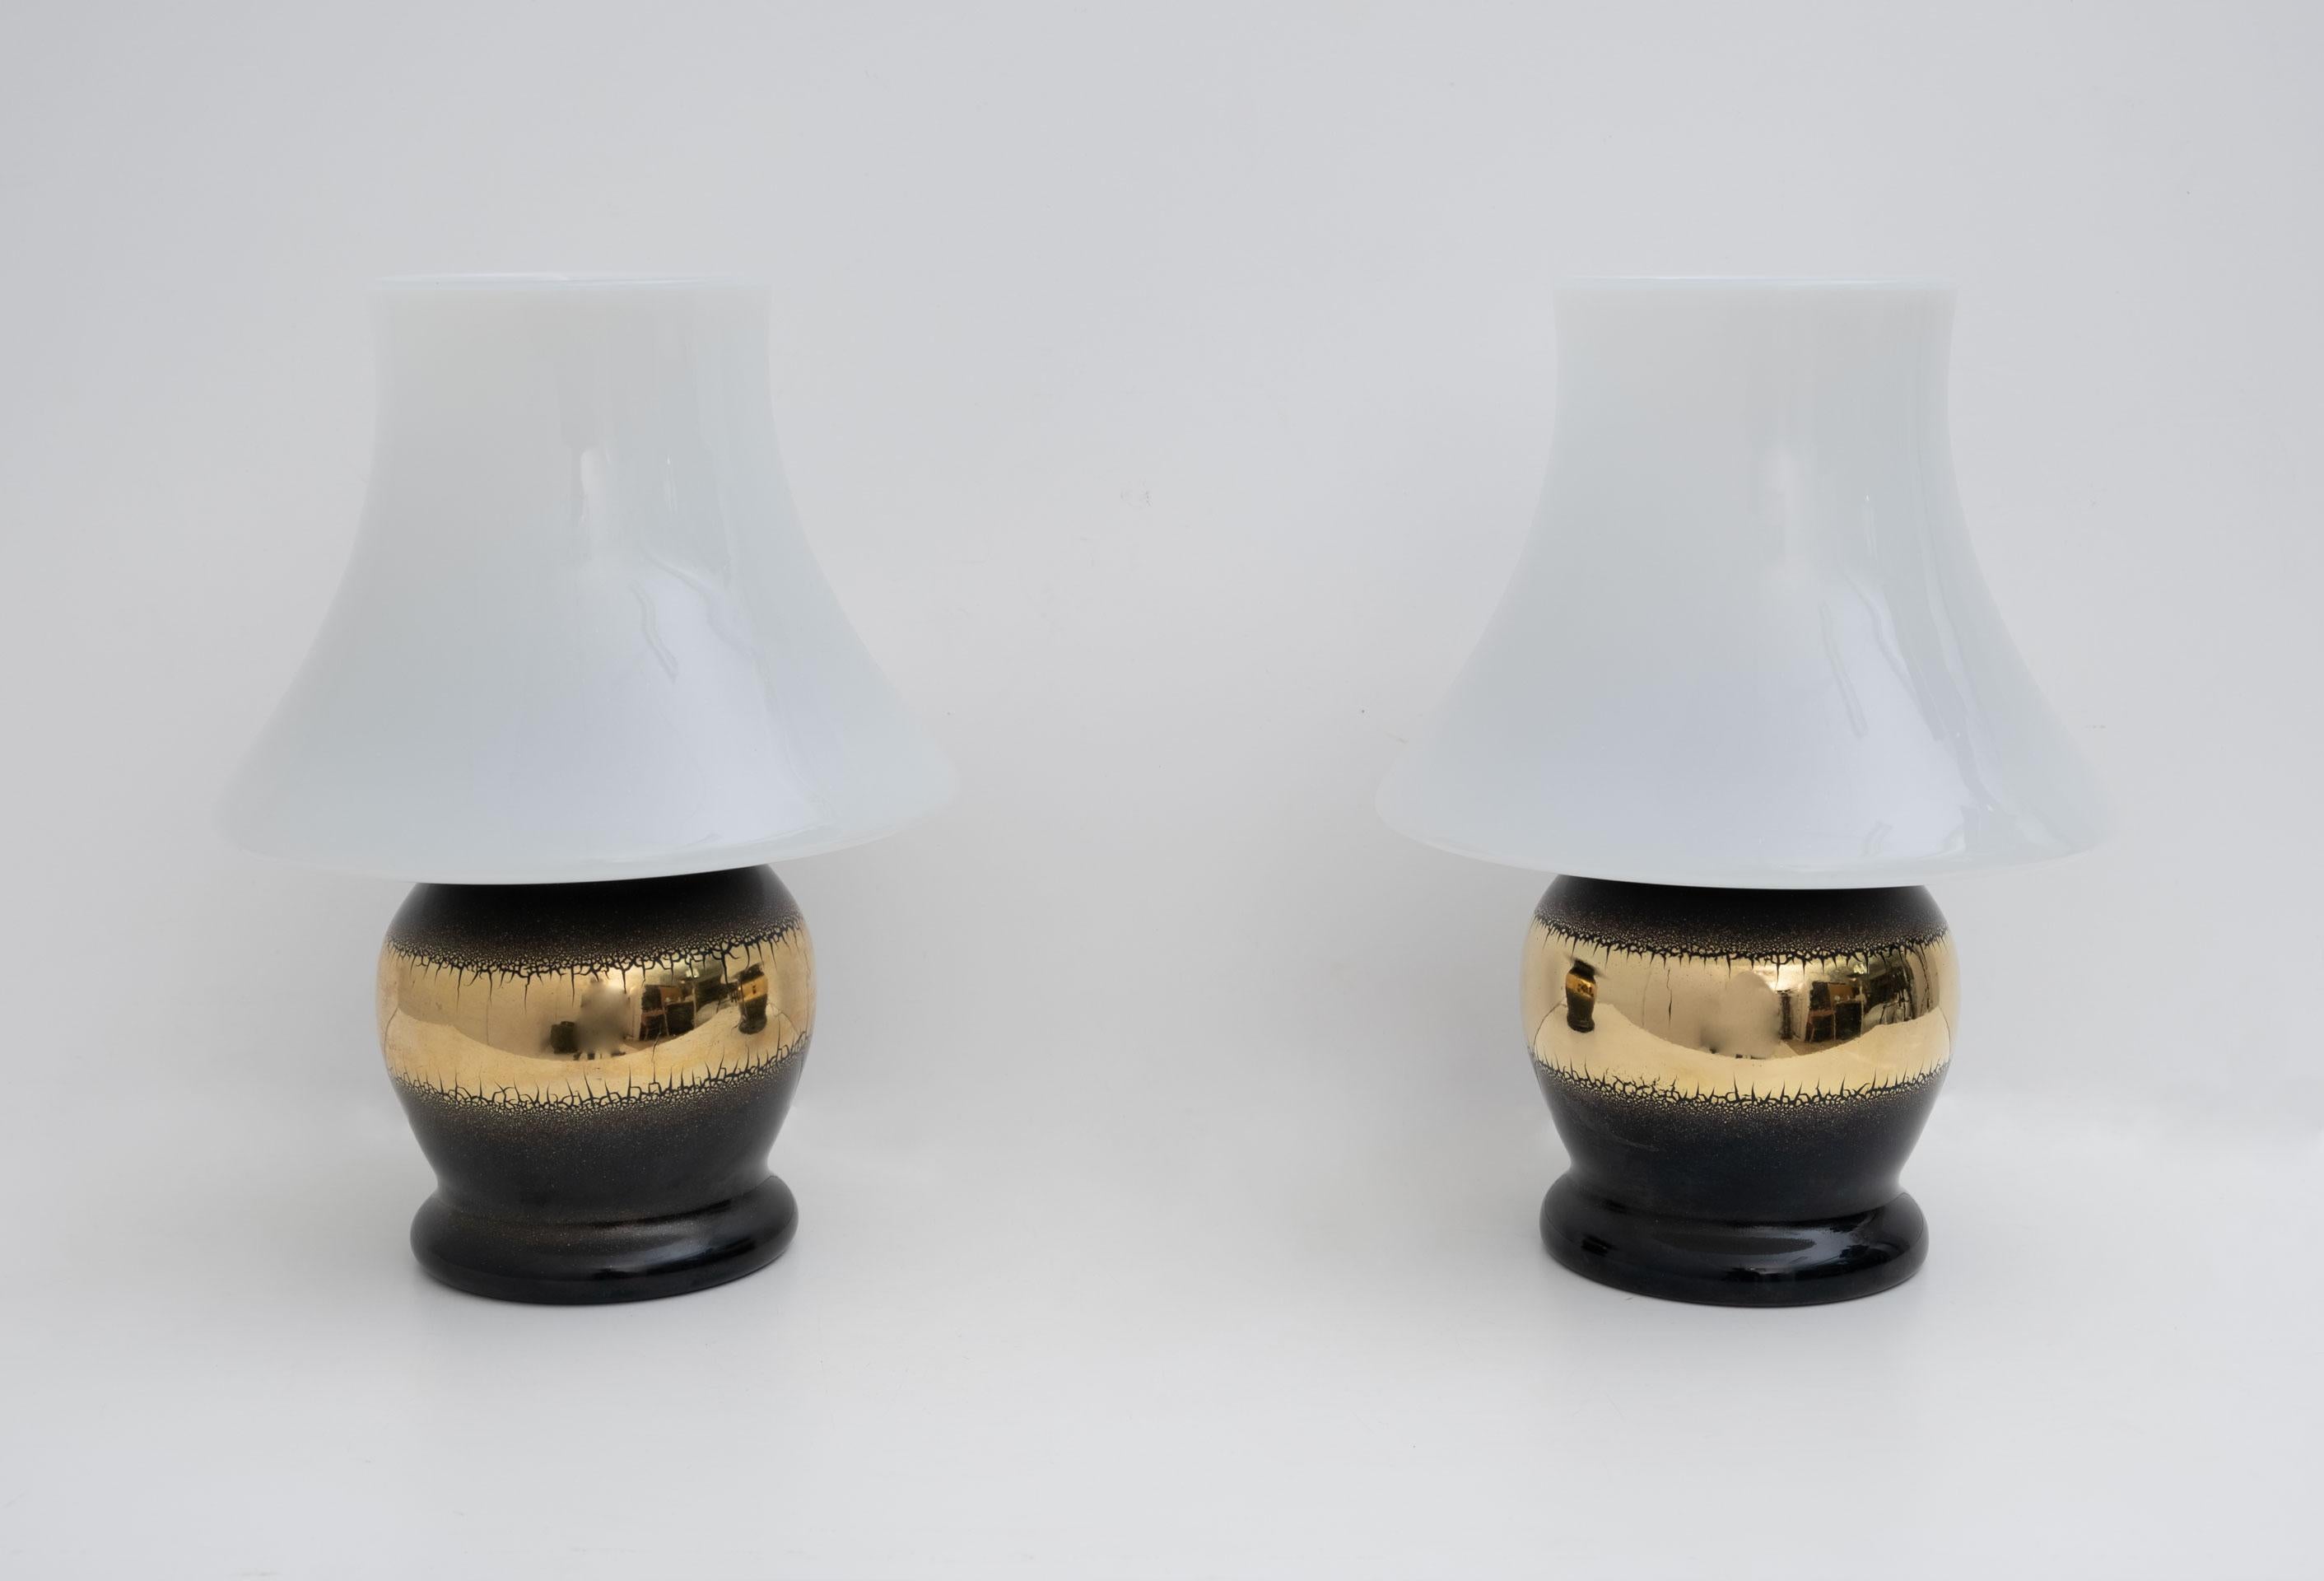 This pair of Murano glass mushroom lamps were produced by the Murano masters in the 1970s.
The lamps are made from a single blown glass and the black base is covered in 24 carat gold leaf.